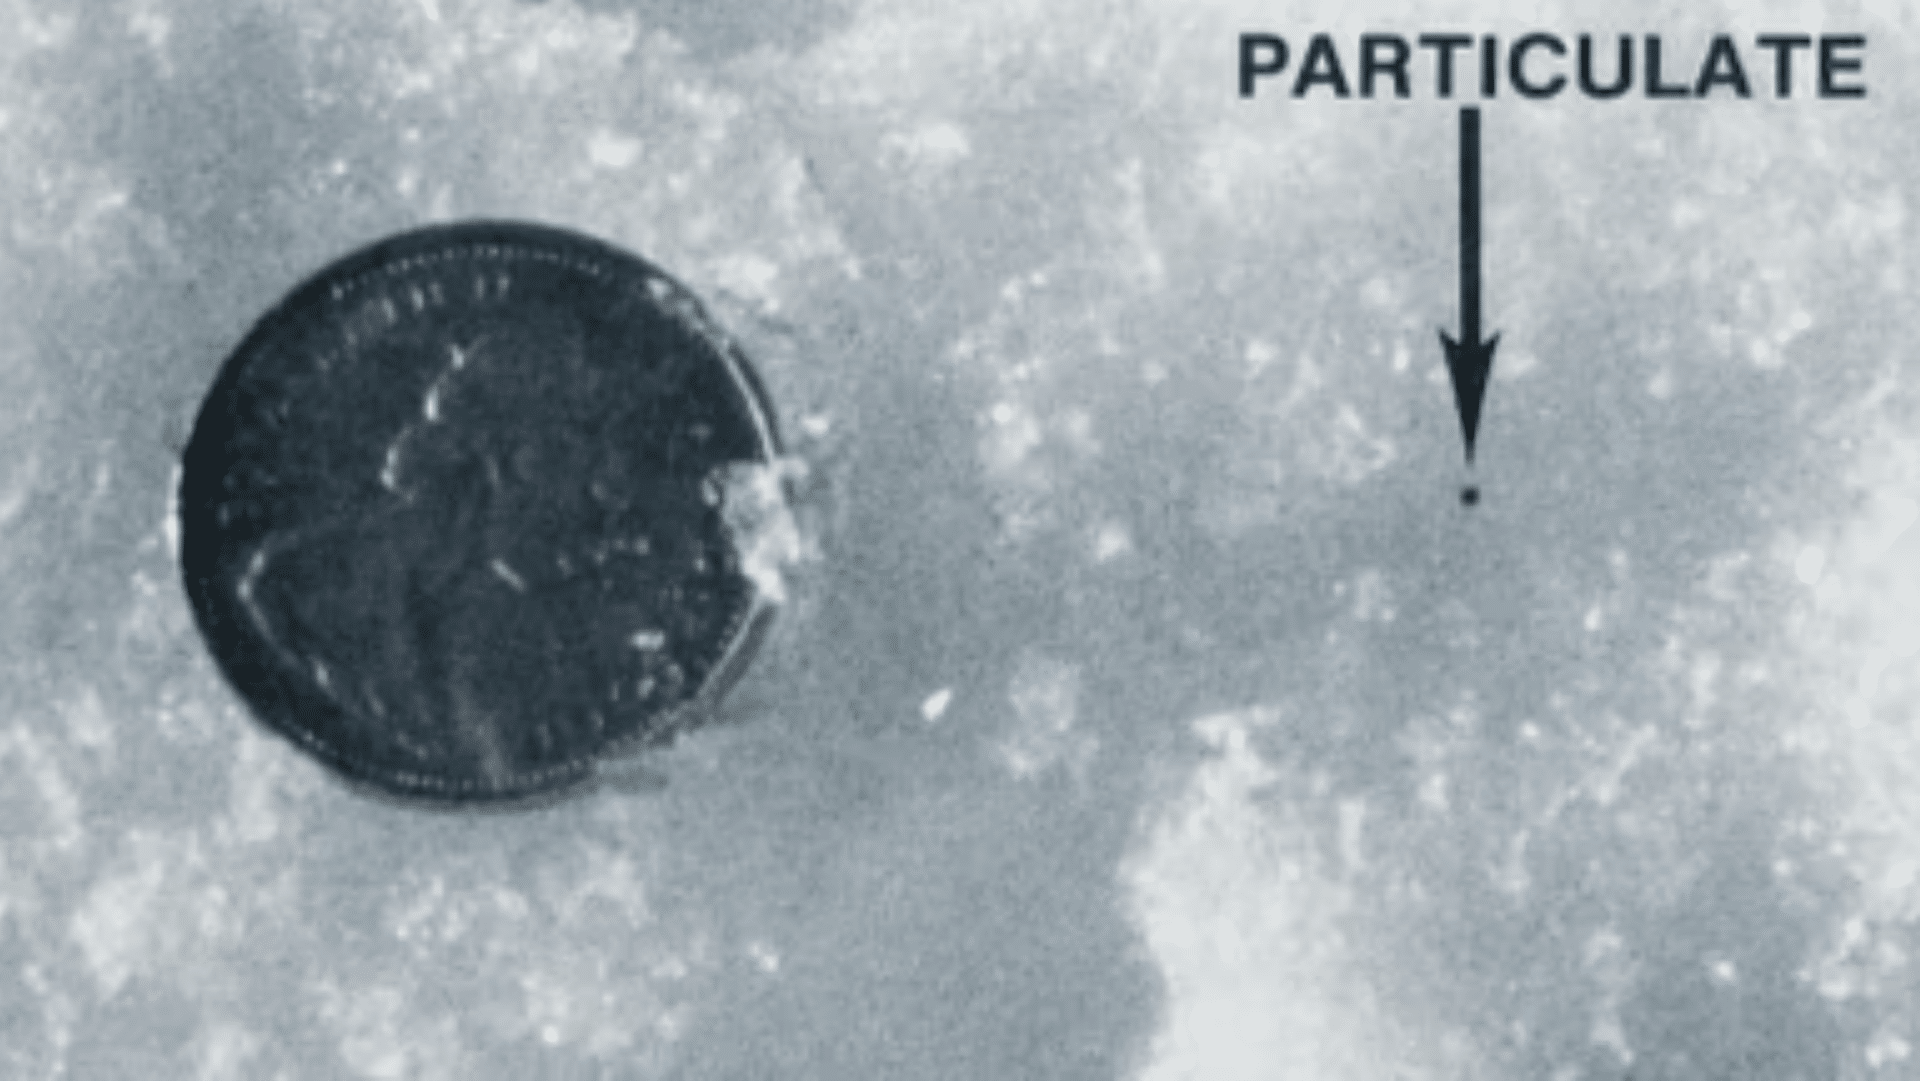 Radioactive debris from the Kosmos 954 satellite compared to a Canadian one cent coin. (Department of Energy via <a href="https://www.youtube.com/watch?v=drDPFs6j3U0">Canadian Nuclear Safety Commission / YouTube</a>)